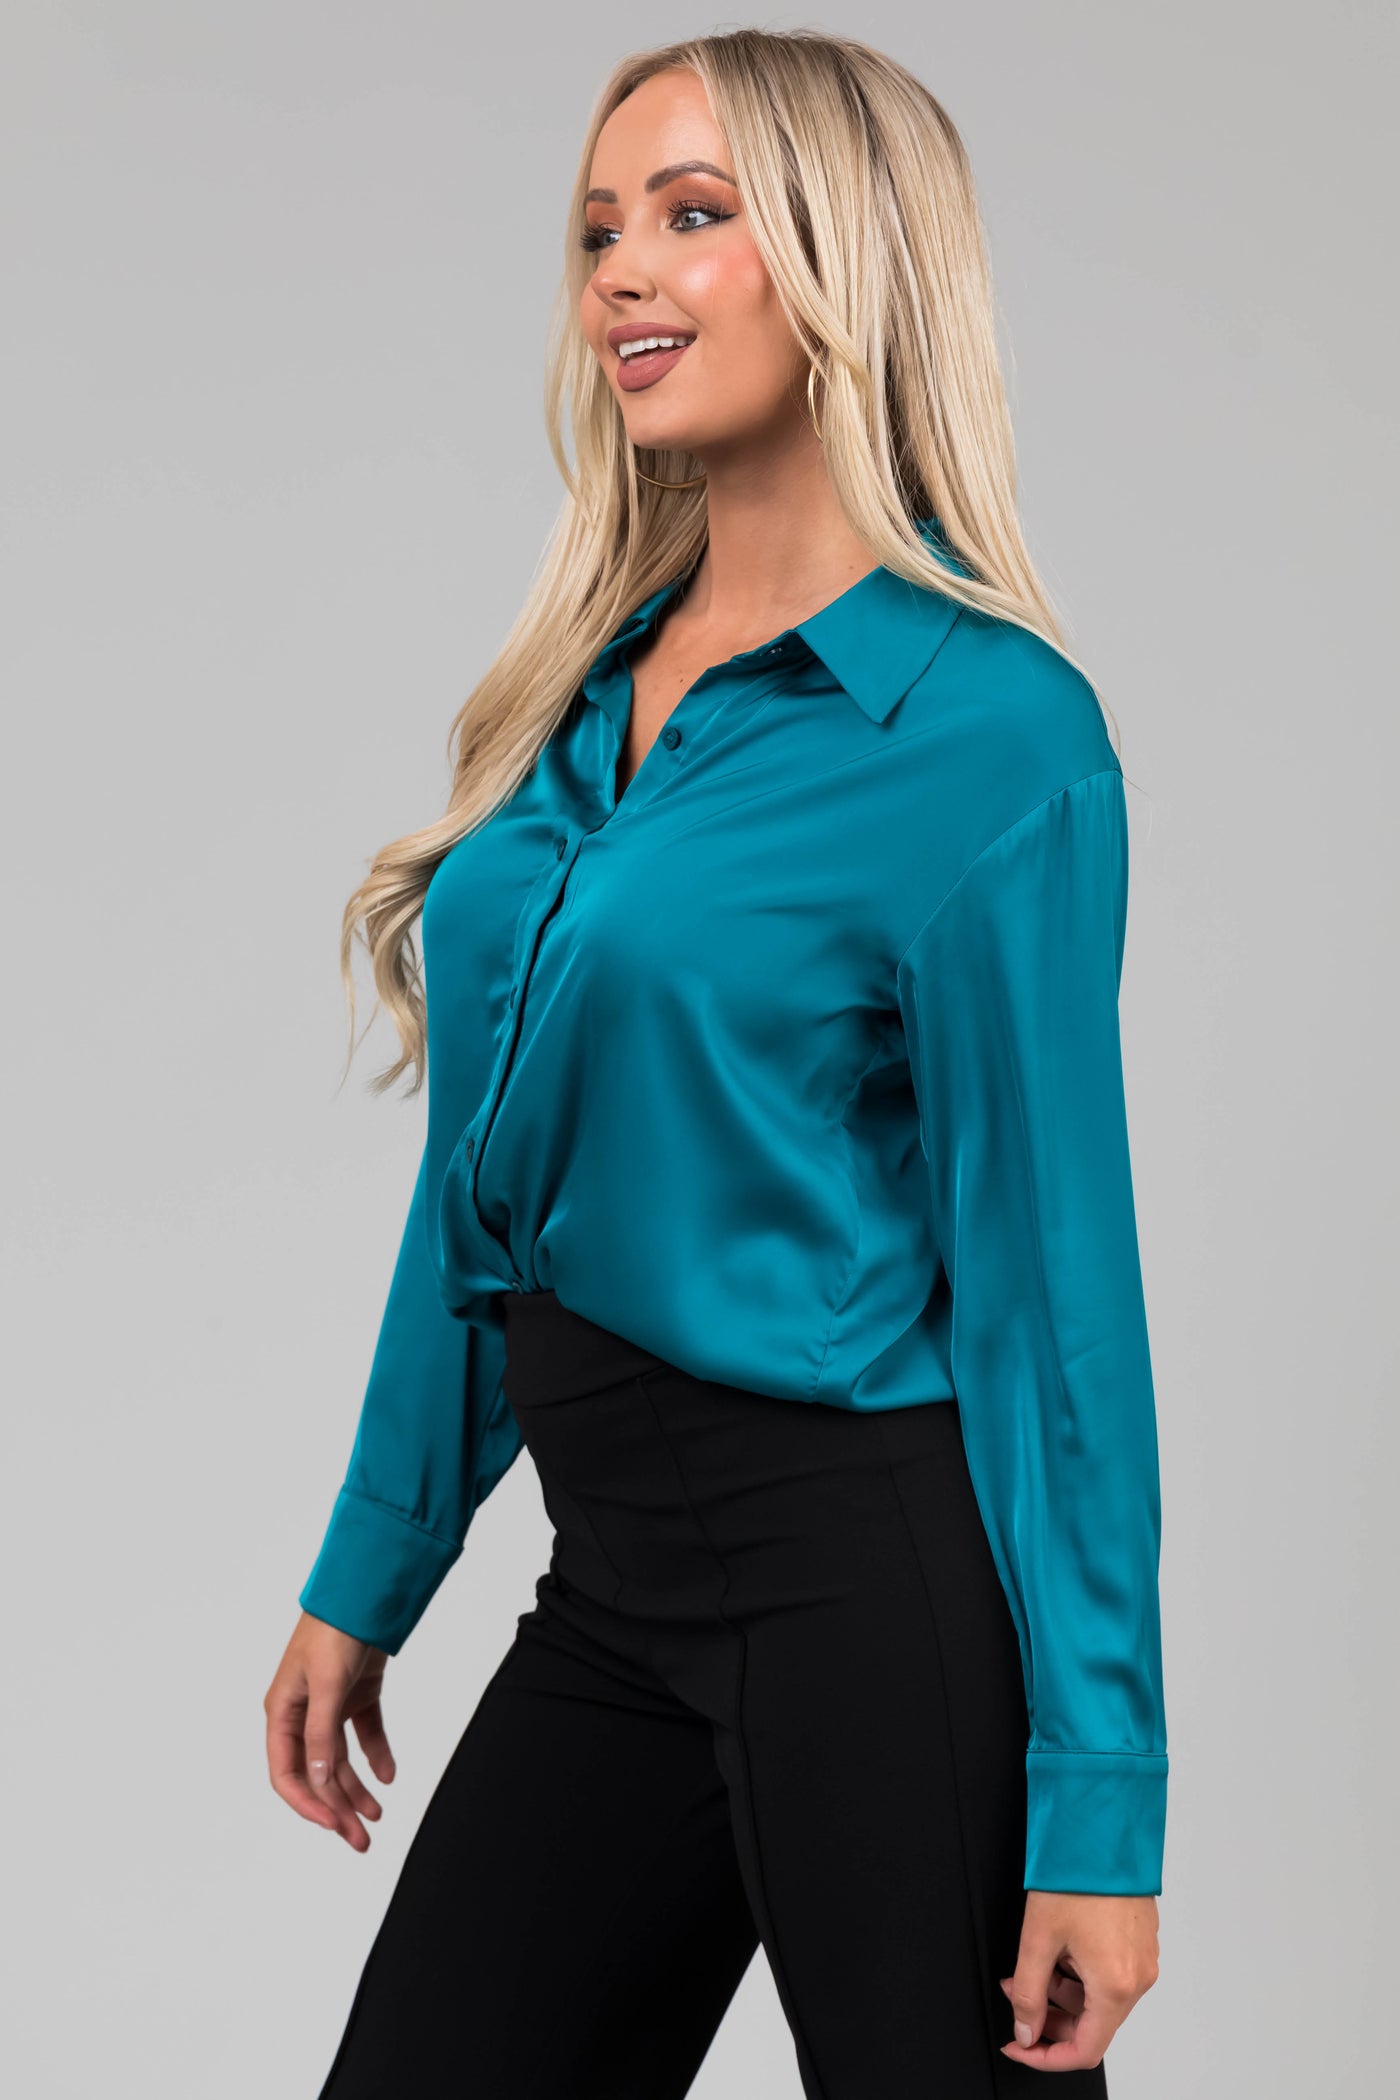 Teal Satin Button Front Collared Shirt